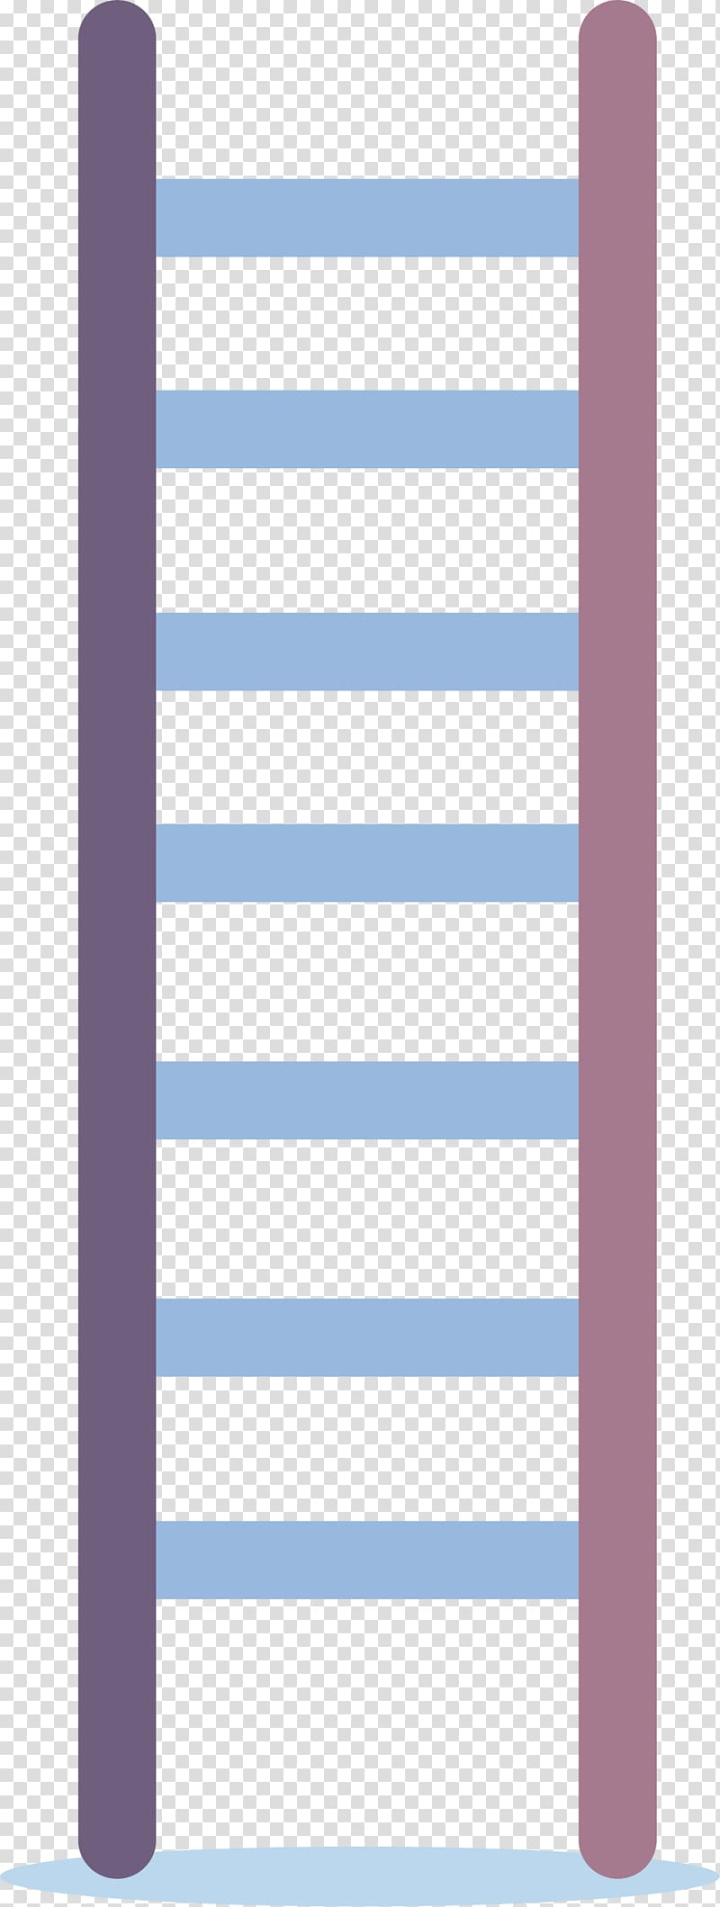 ladder,purple,google,images,blue,angle,text,violet,rectangle,technic,stairs,purple flowers,purple border,purple vector,search engine,square,straight ladder,area,vertical traffic,purple smoke,google images,ladder vector,line,paper,perpendicular,euclidean vector,purple background,purple flower border,purple flower,png clipart,free png,transparent background,free clipart,clip art,free download,png,comhiclipart